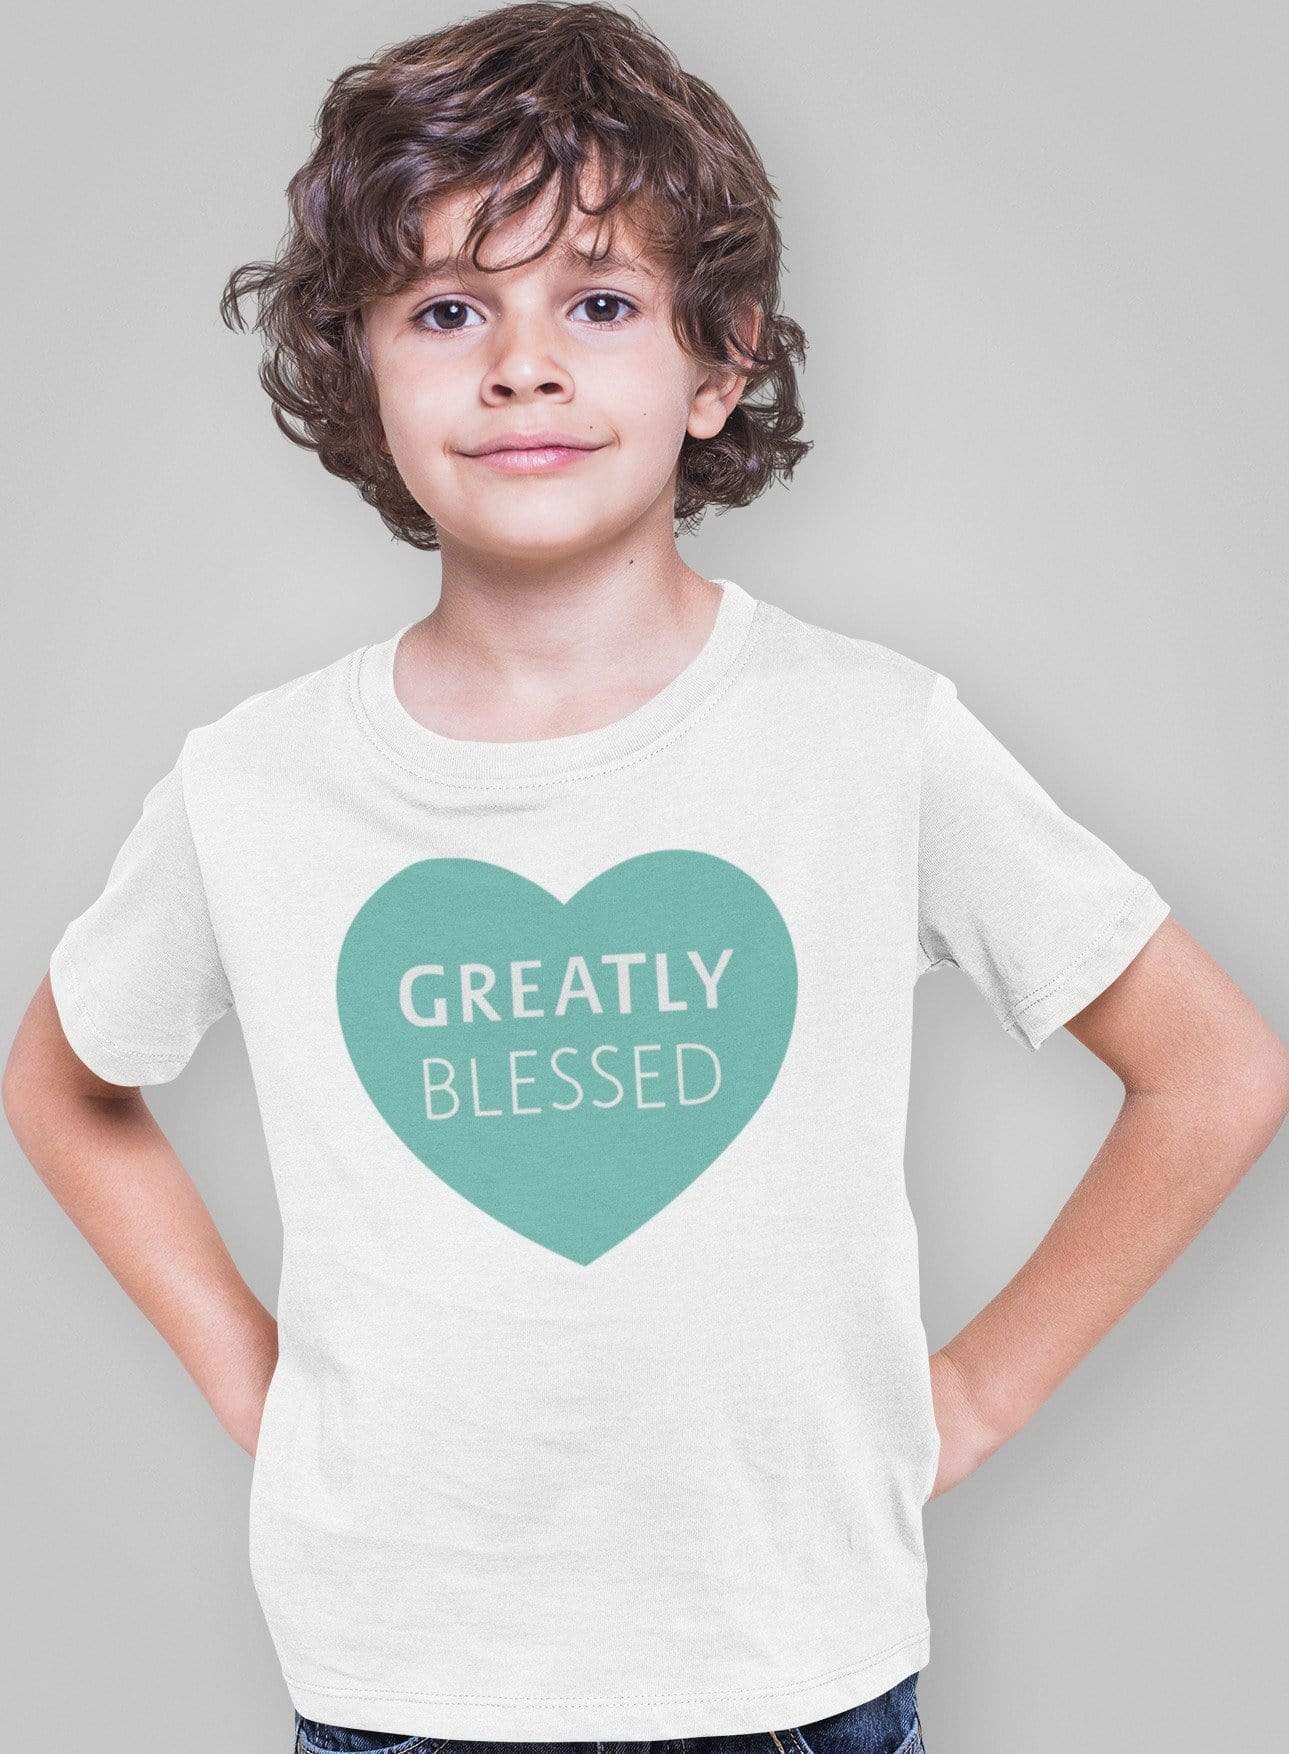 Living Words Boy Round neck Tshirt 0-11M / White Greatly Blessed